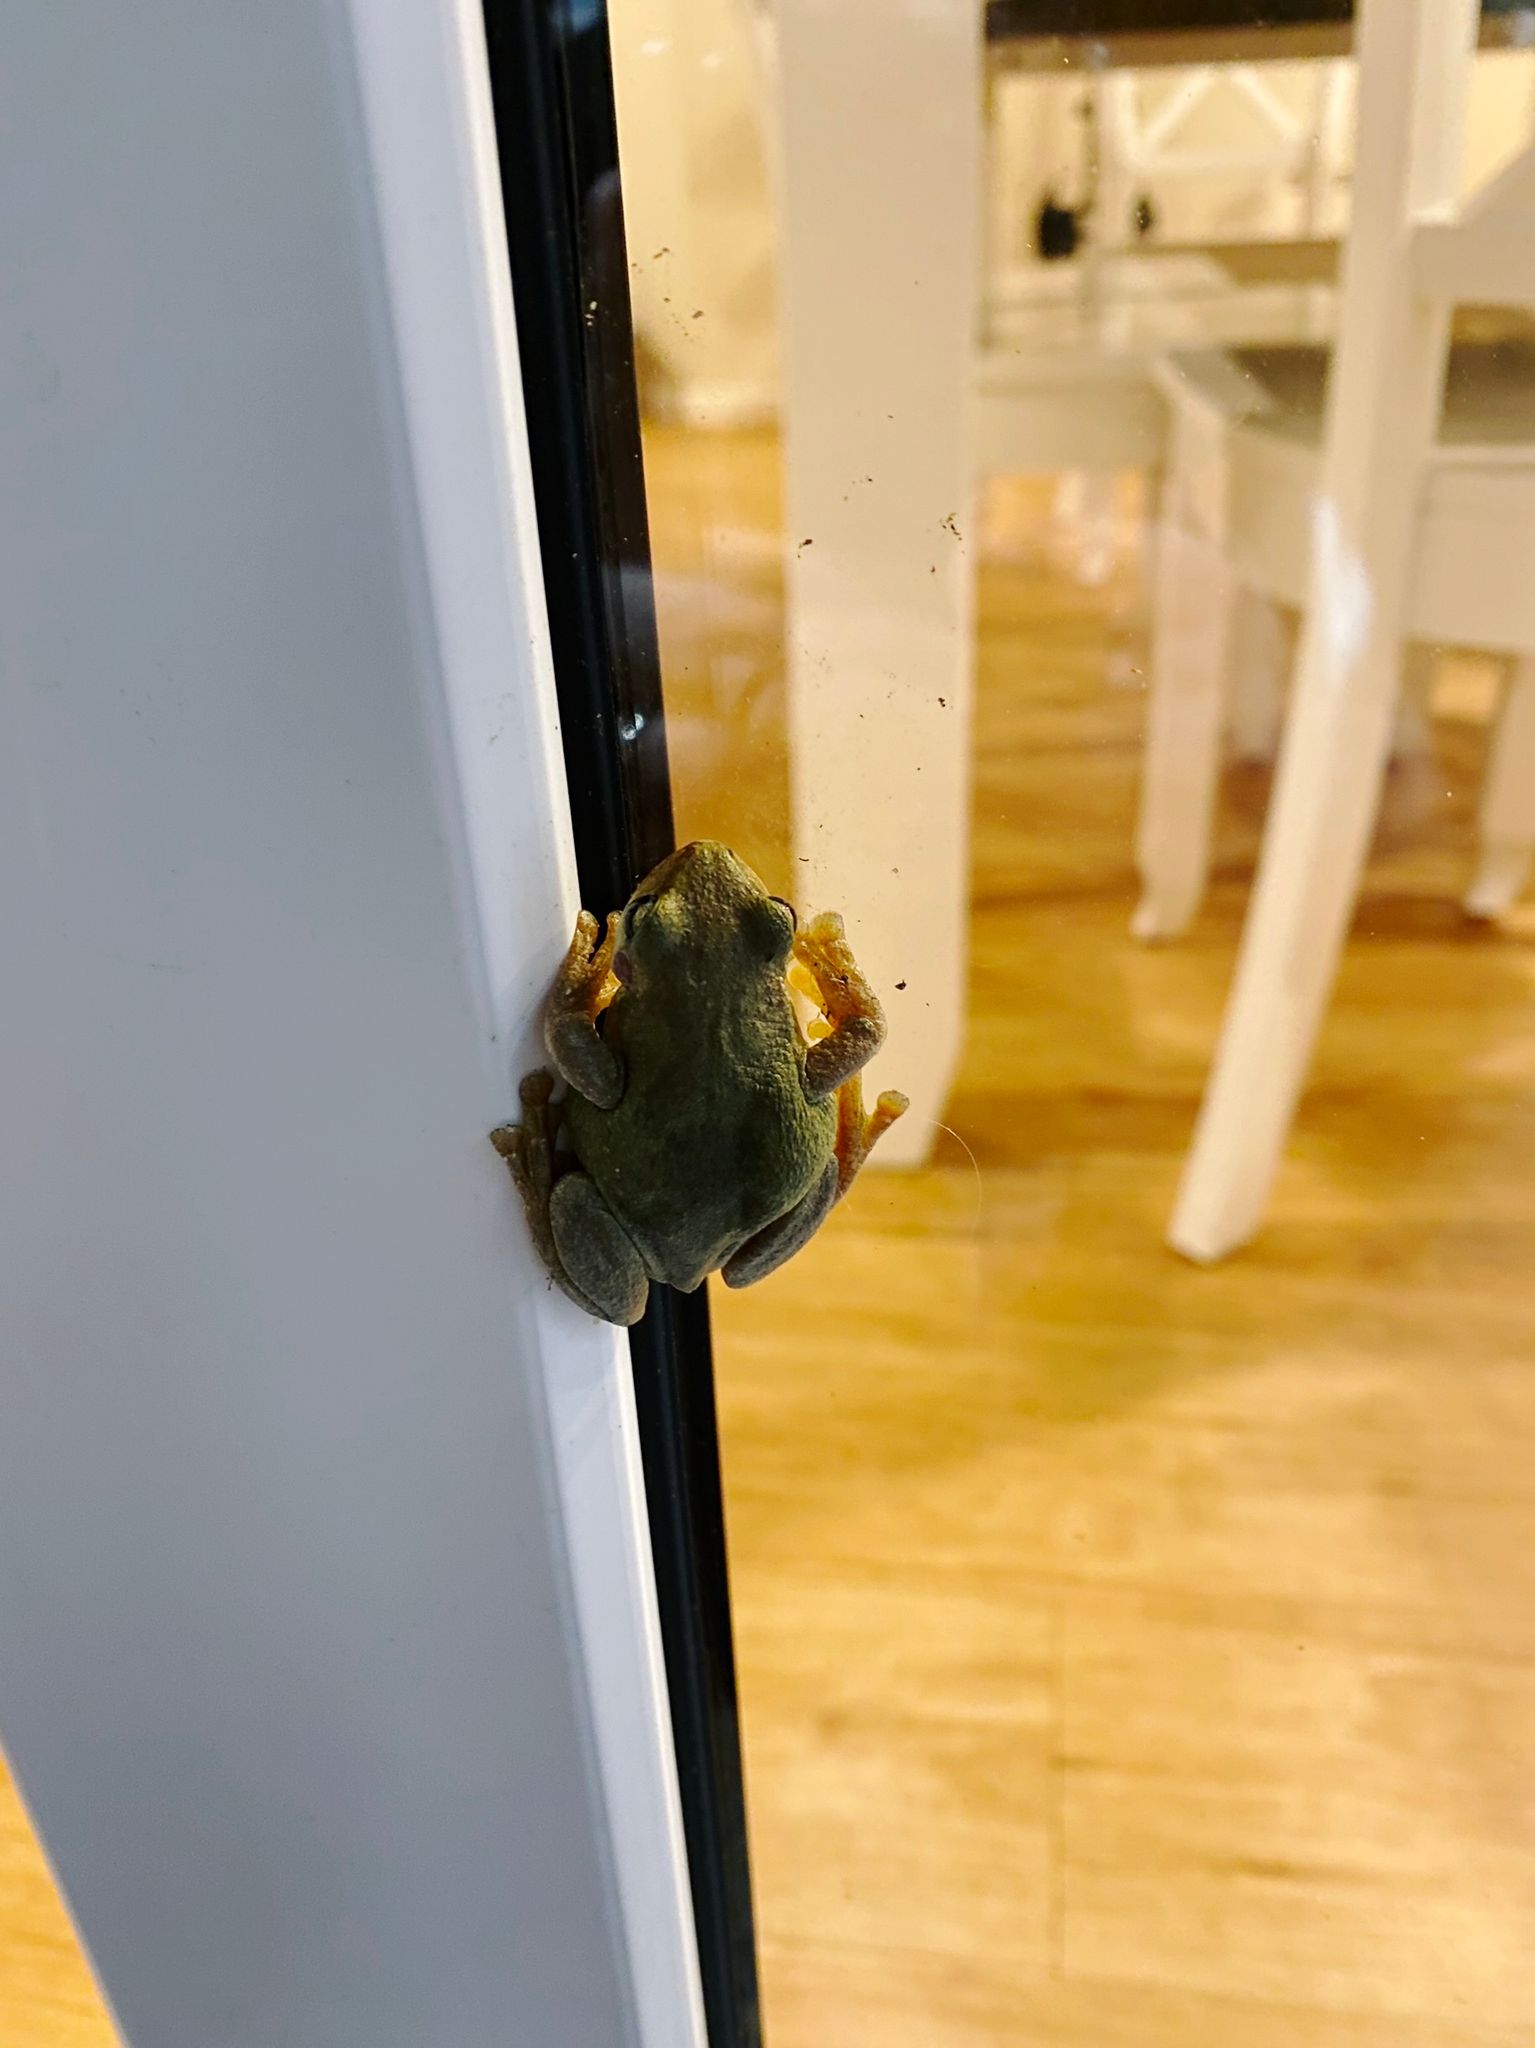 A photo of a small brownish-green frog sitting on a glass door.